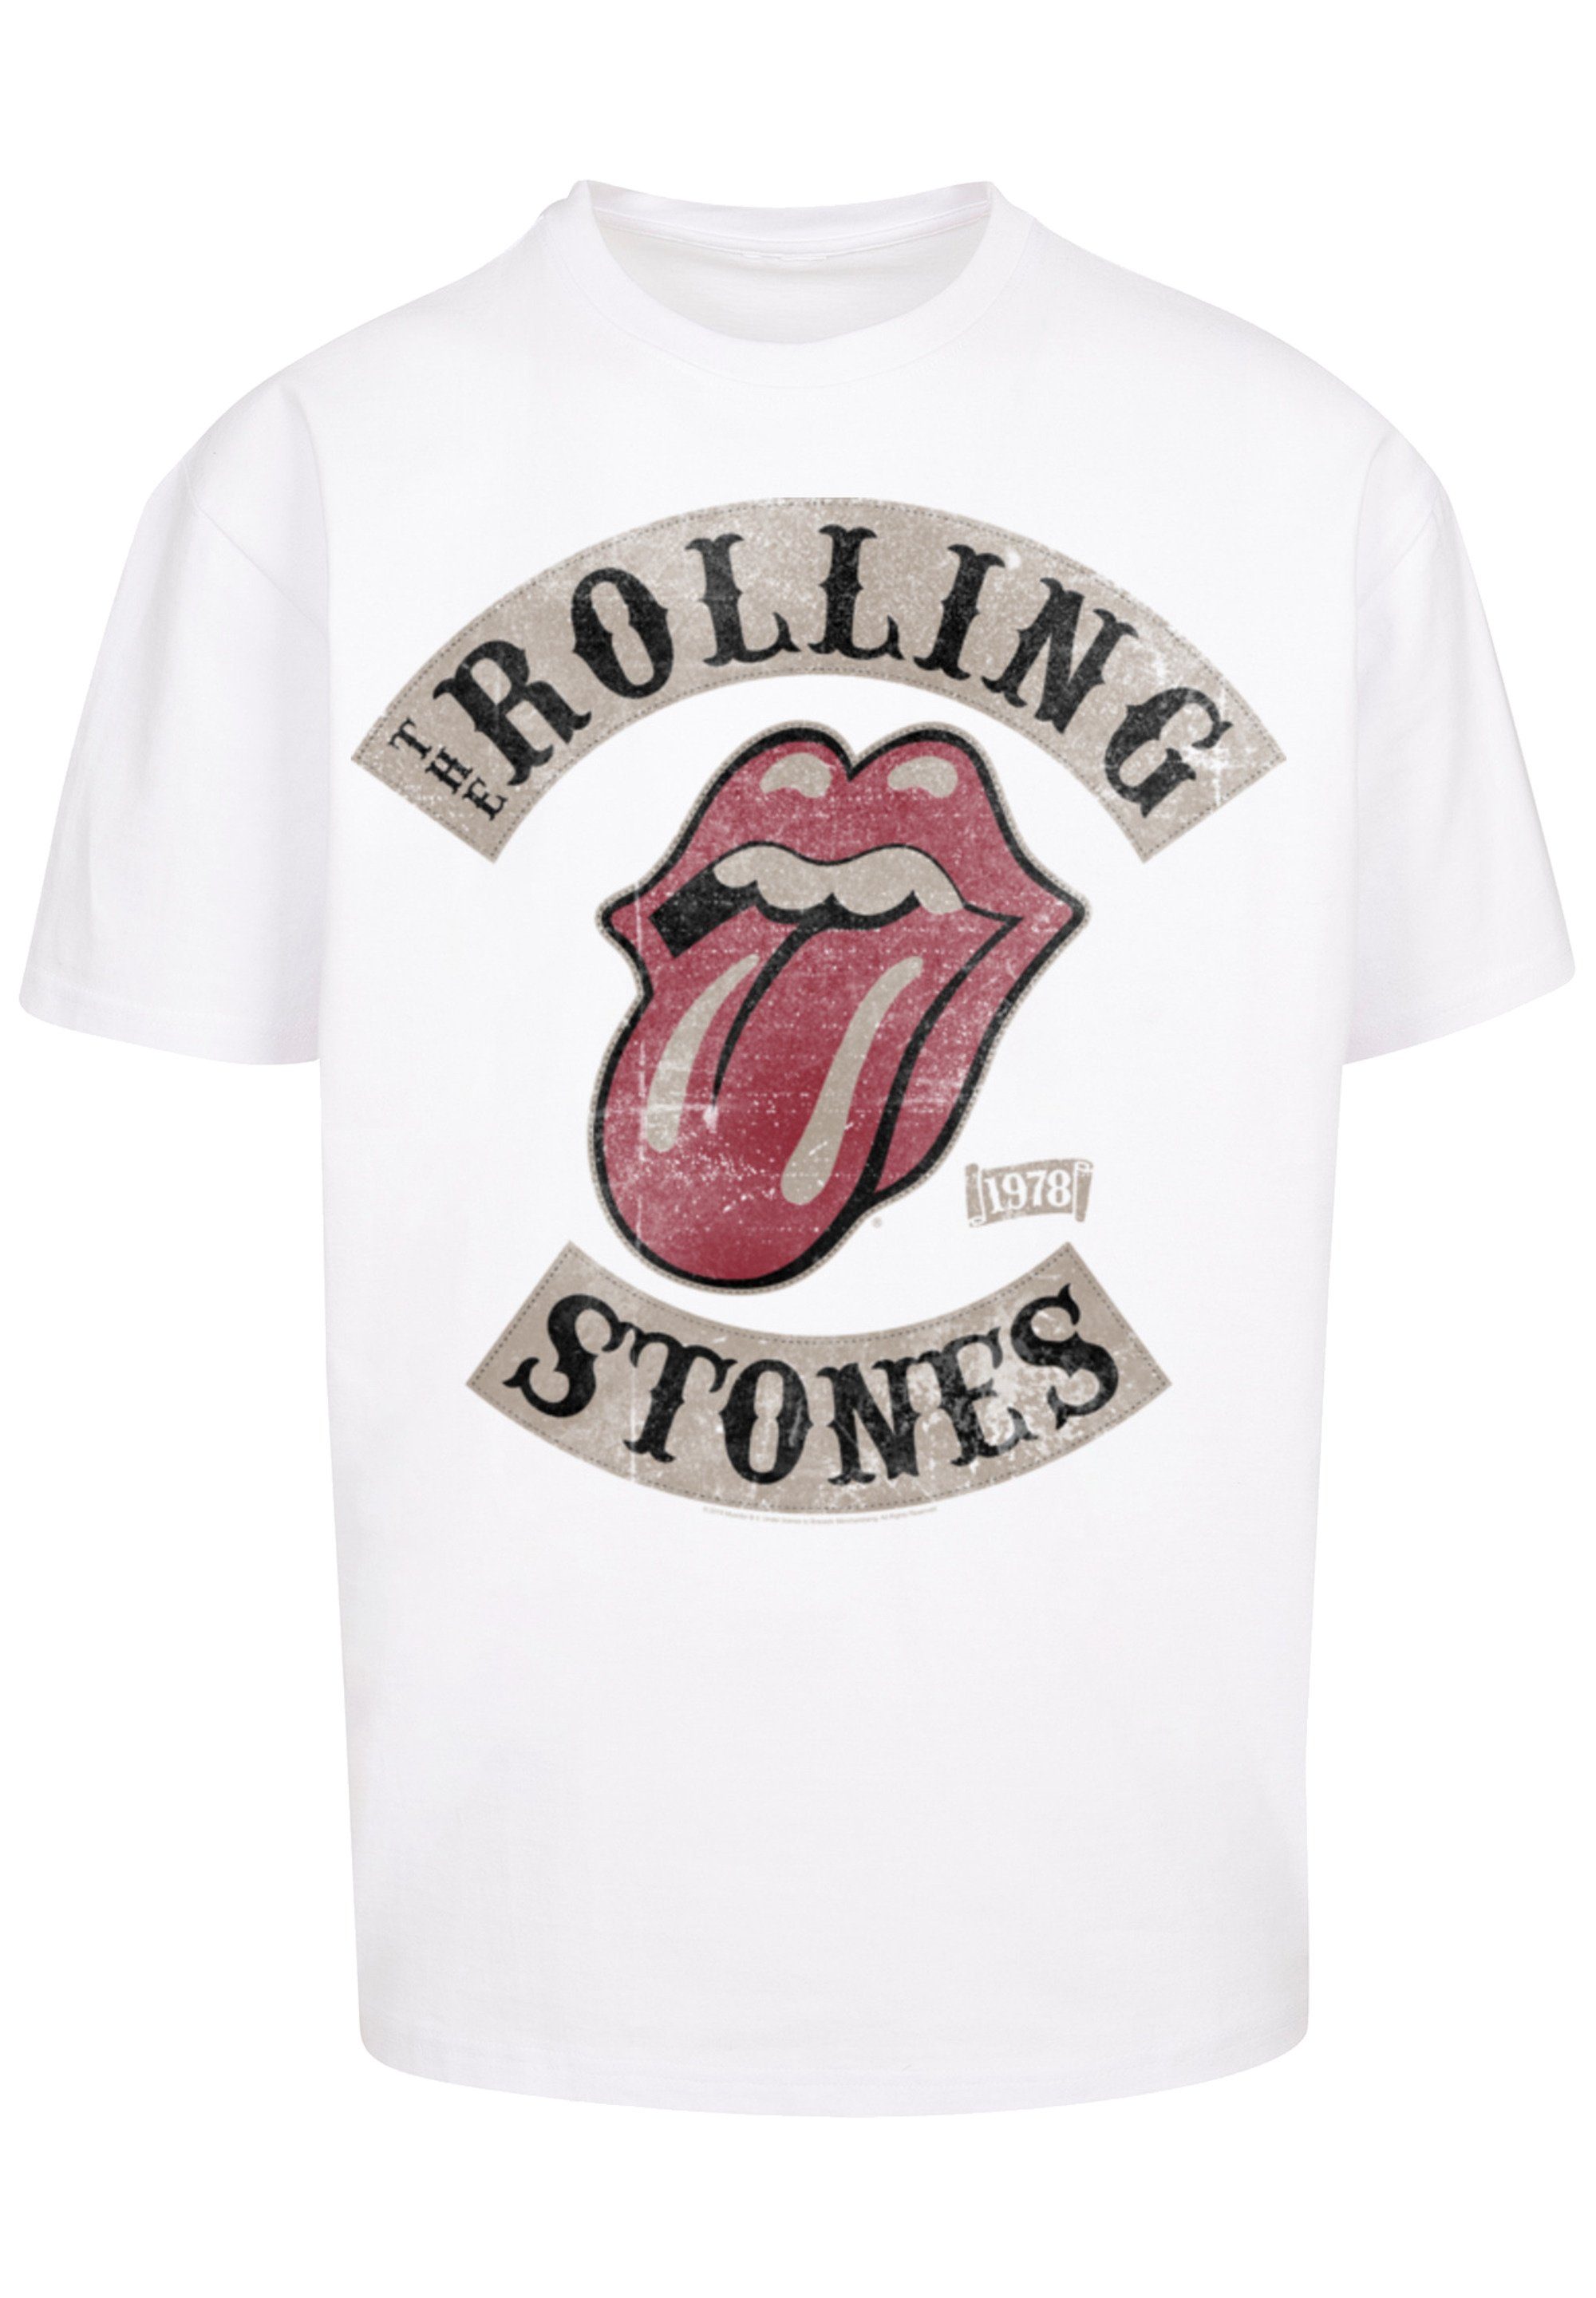 T-Shirt Print Stones The SIZE F4NT4STIC PLUS Rolling Tour weiß '78